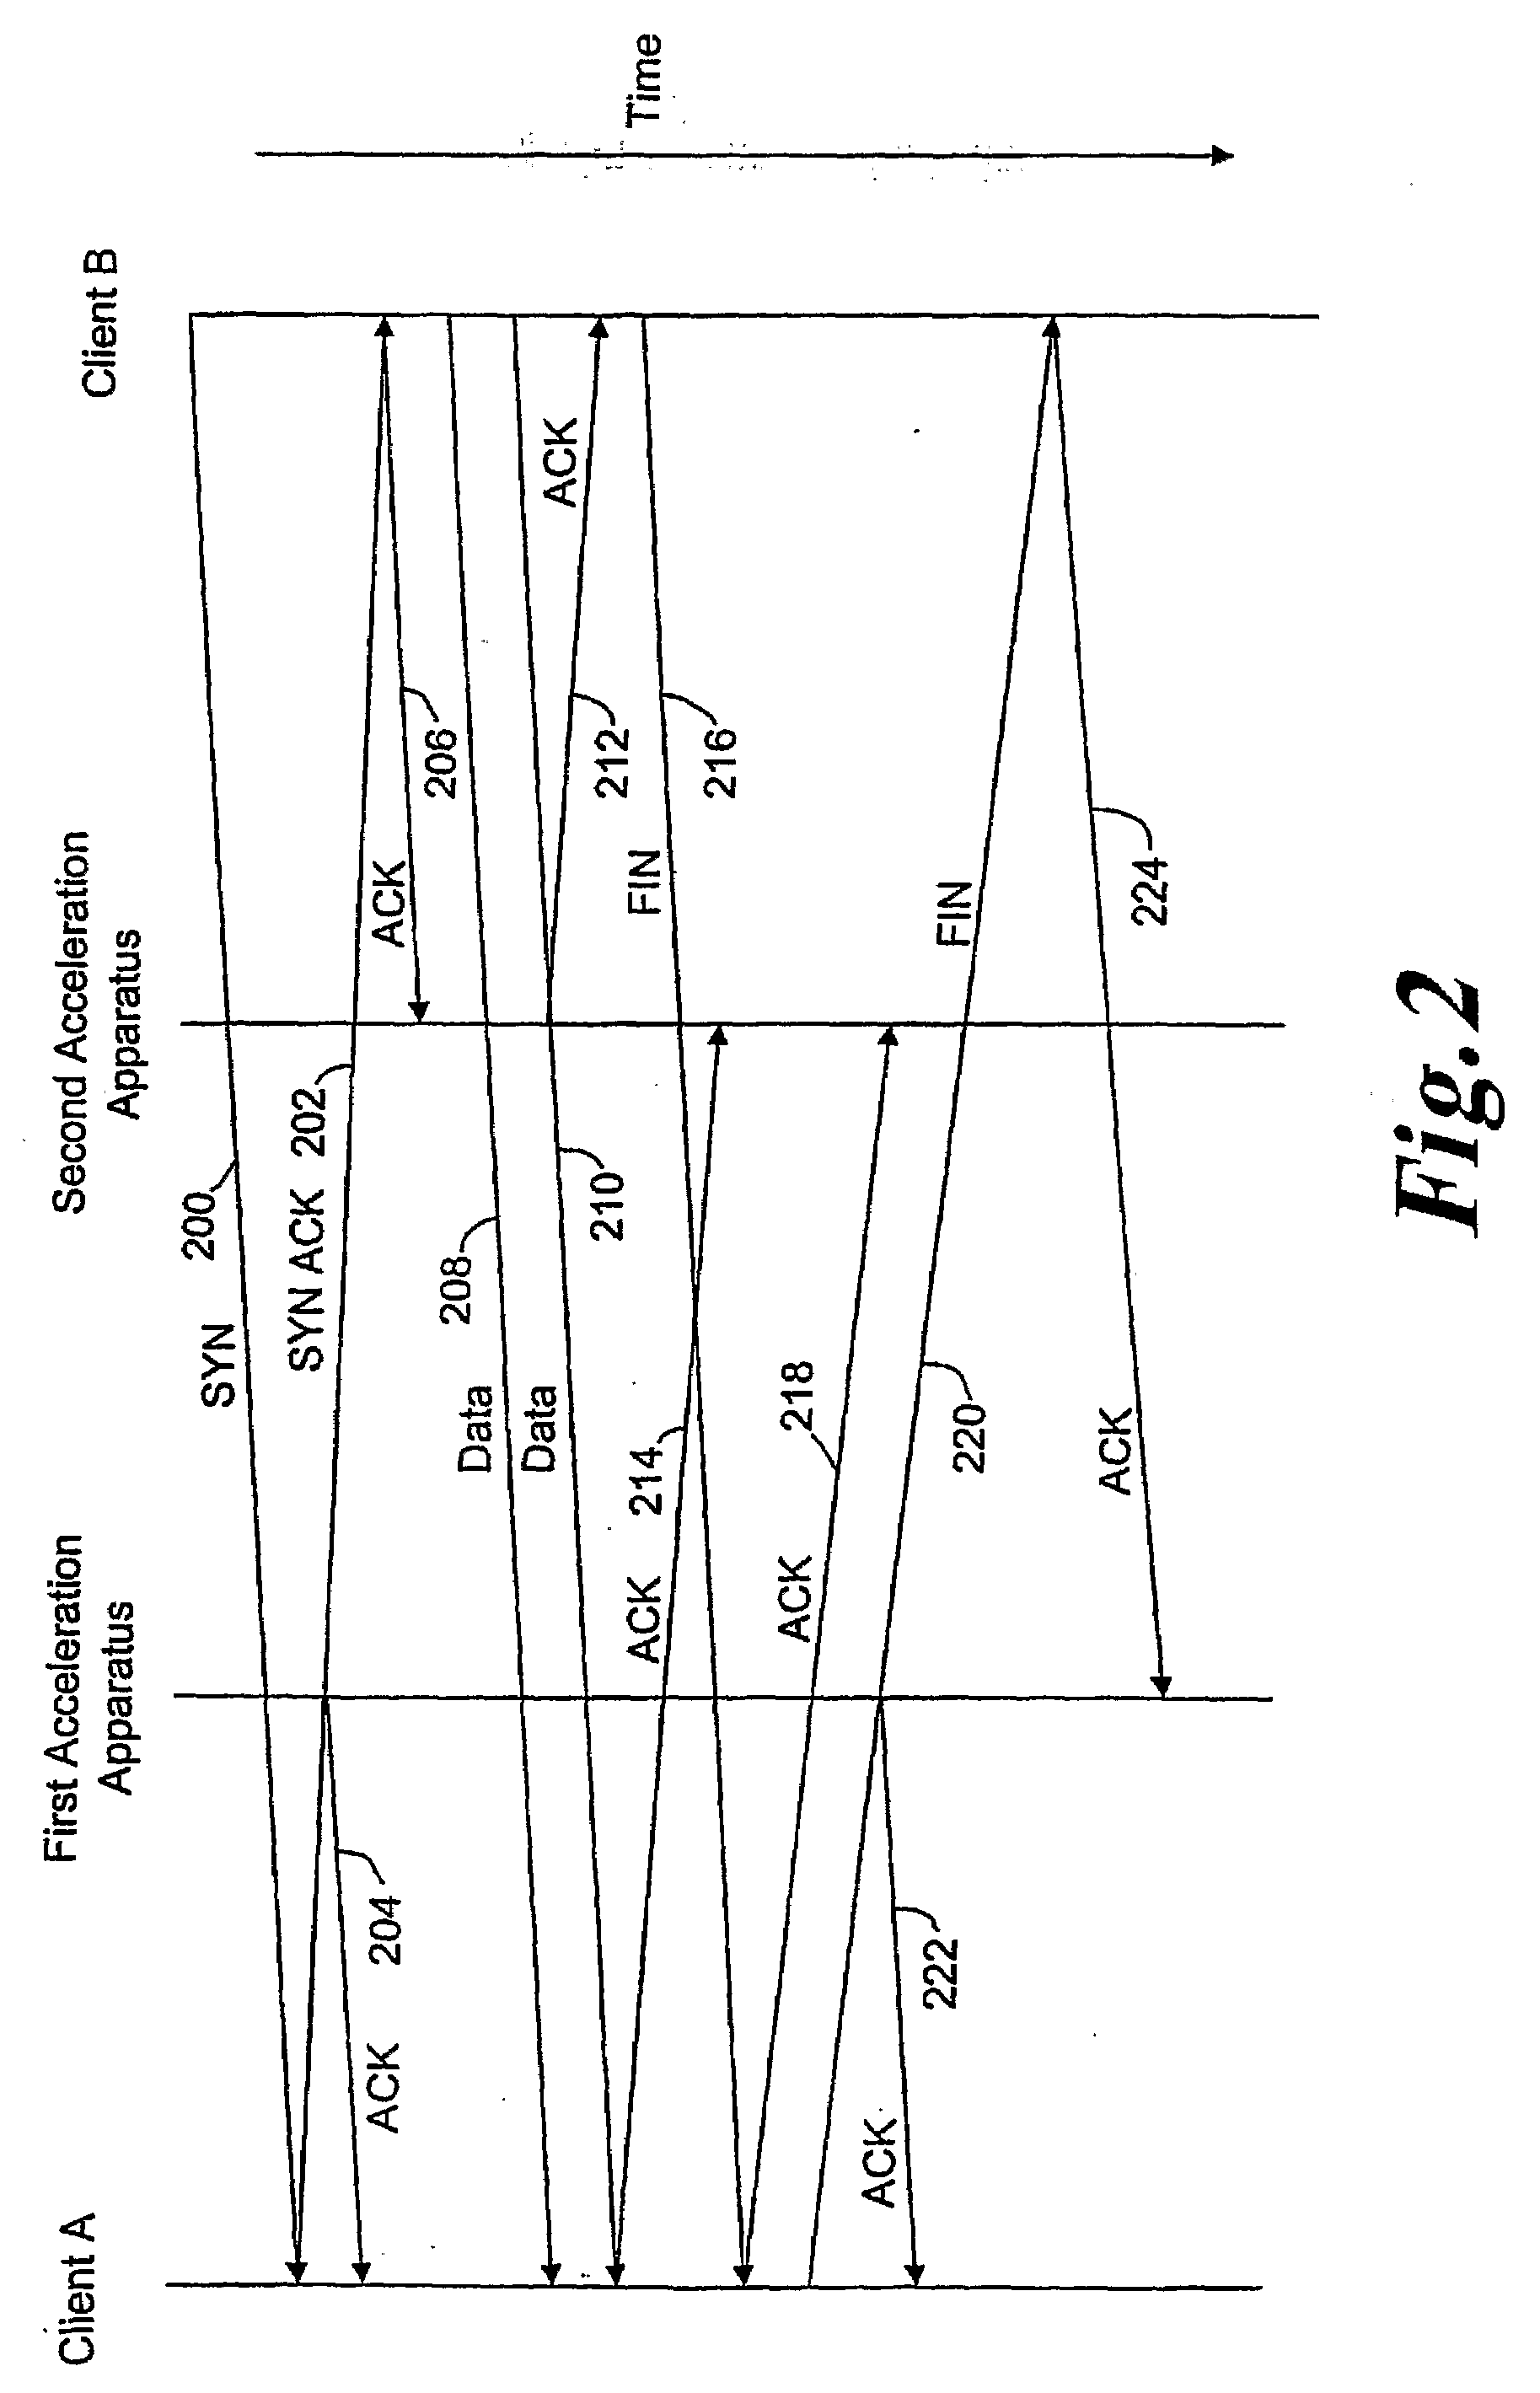 Method Apparatus and System for Accelerated Communication